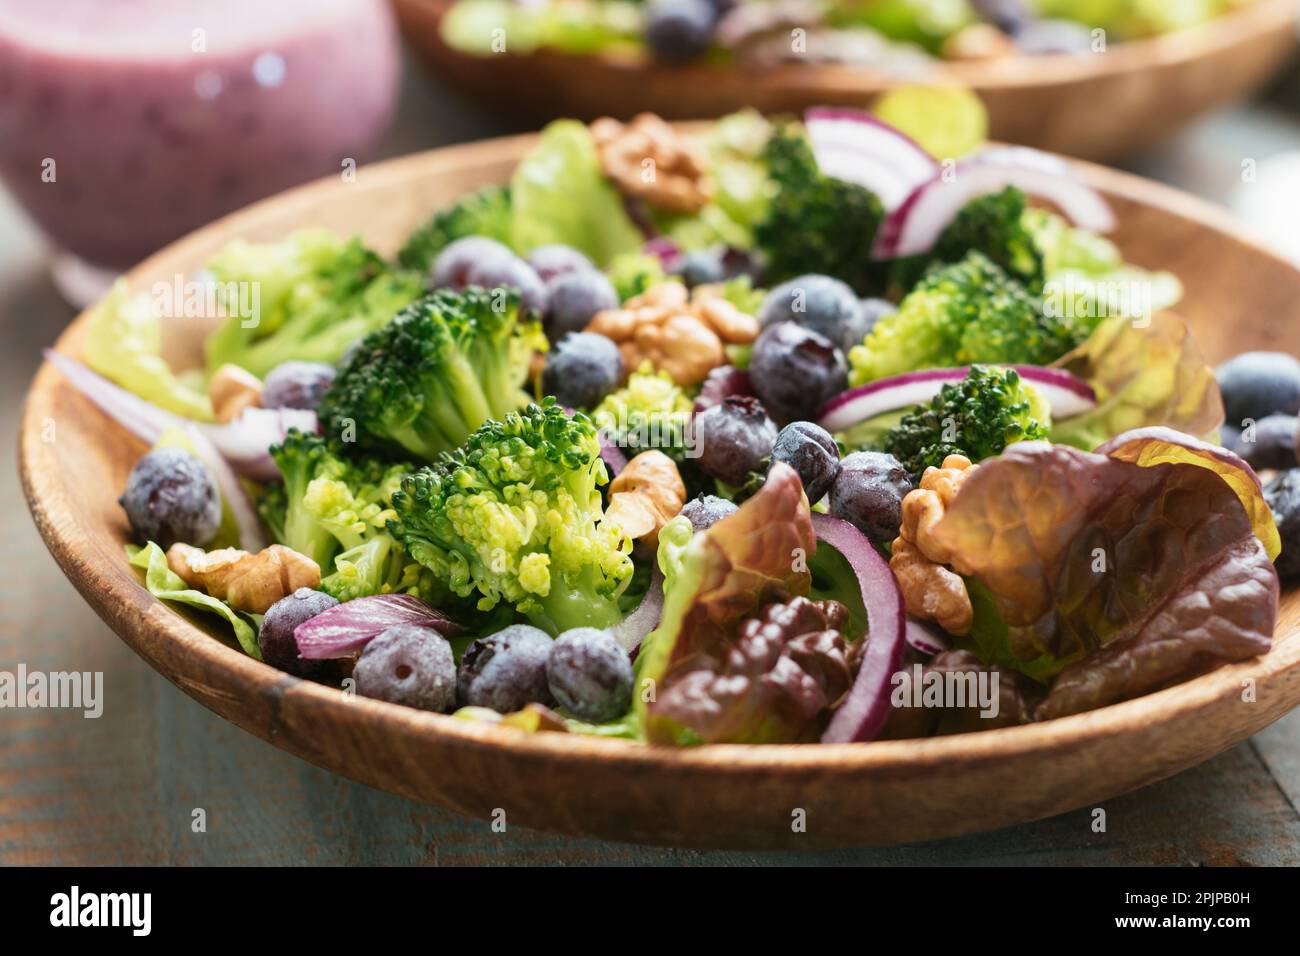 Home made vegan broccoli and blueberry salad with toasted walnuts, served with a blueberry dressing Stock Photo